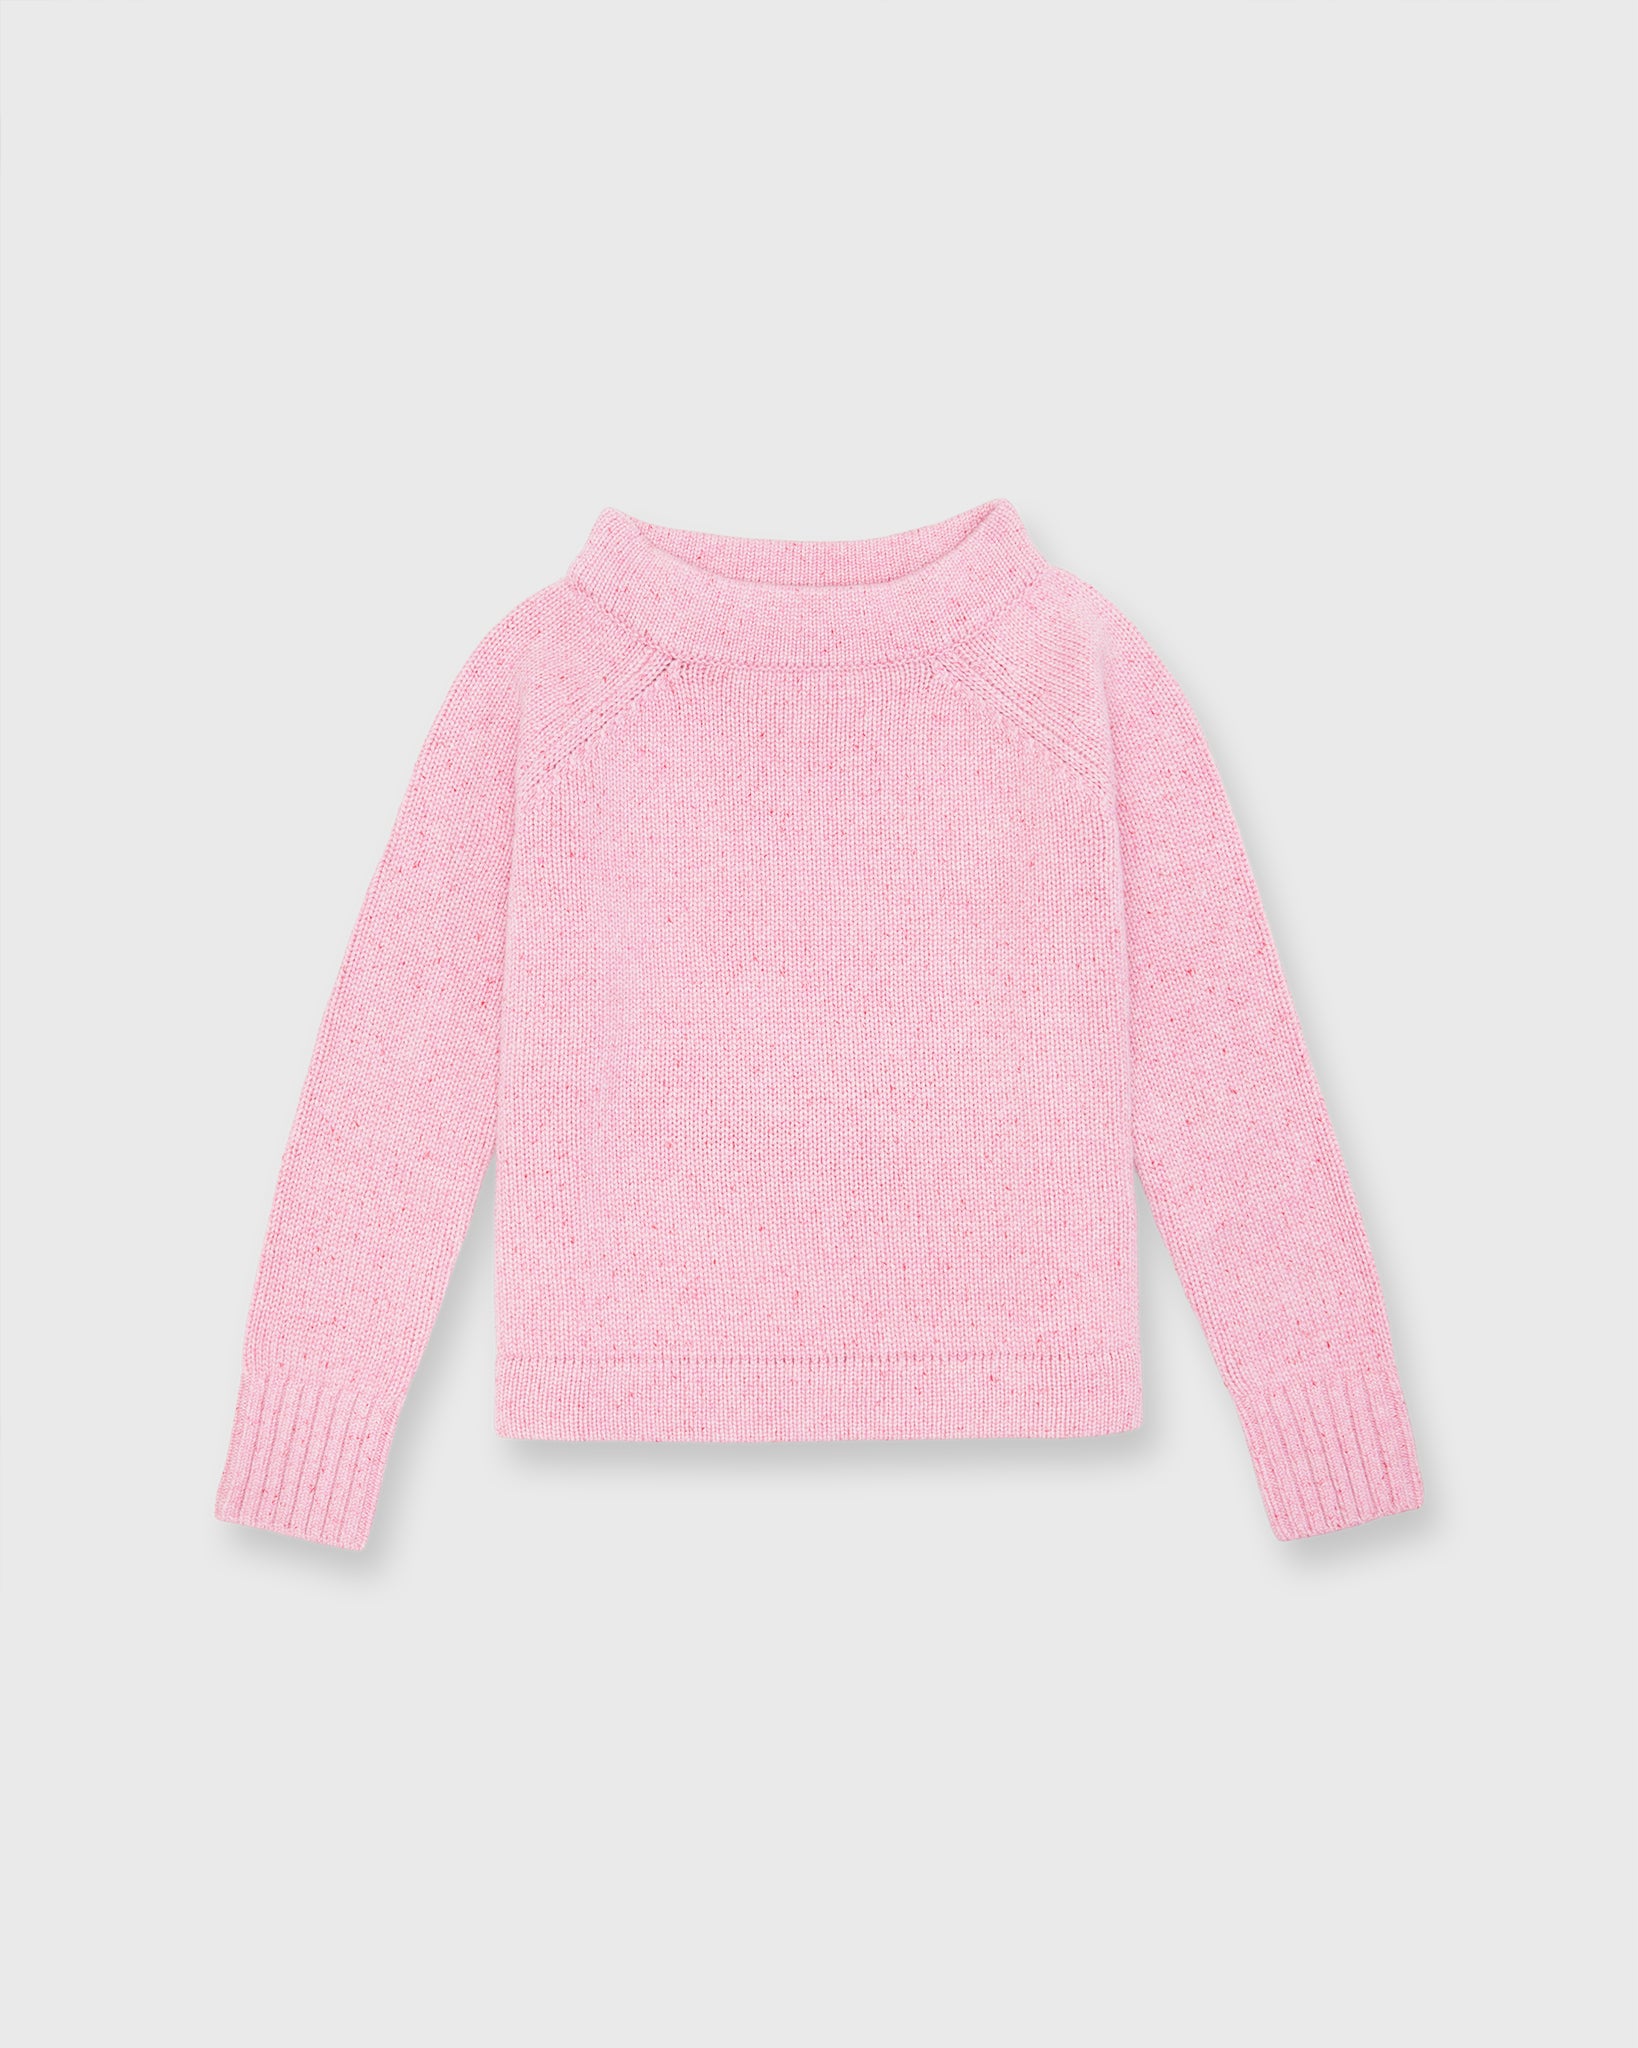 in Mashburn Shop Sweater | Donegal Ann Pink Golightly Cashmere